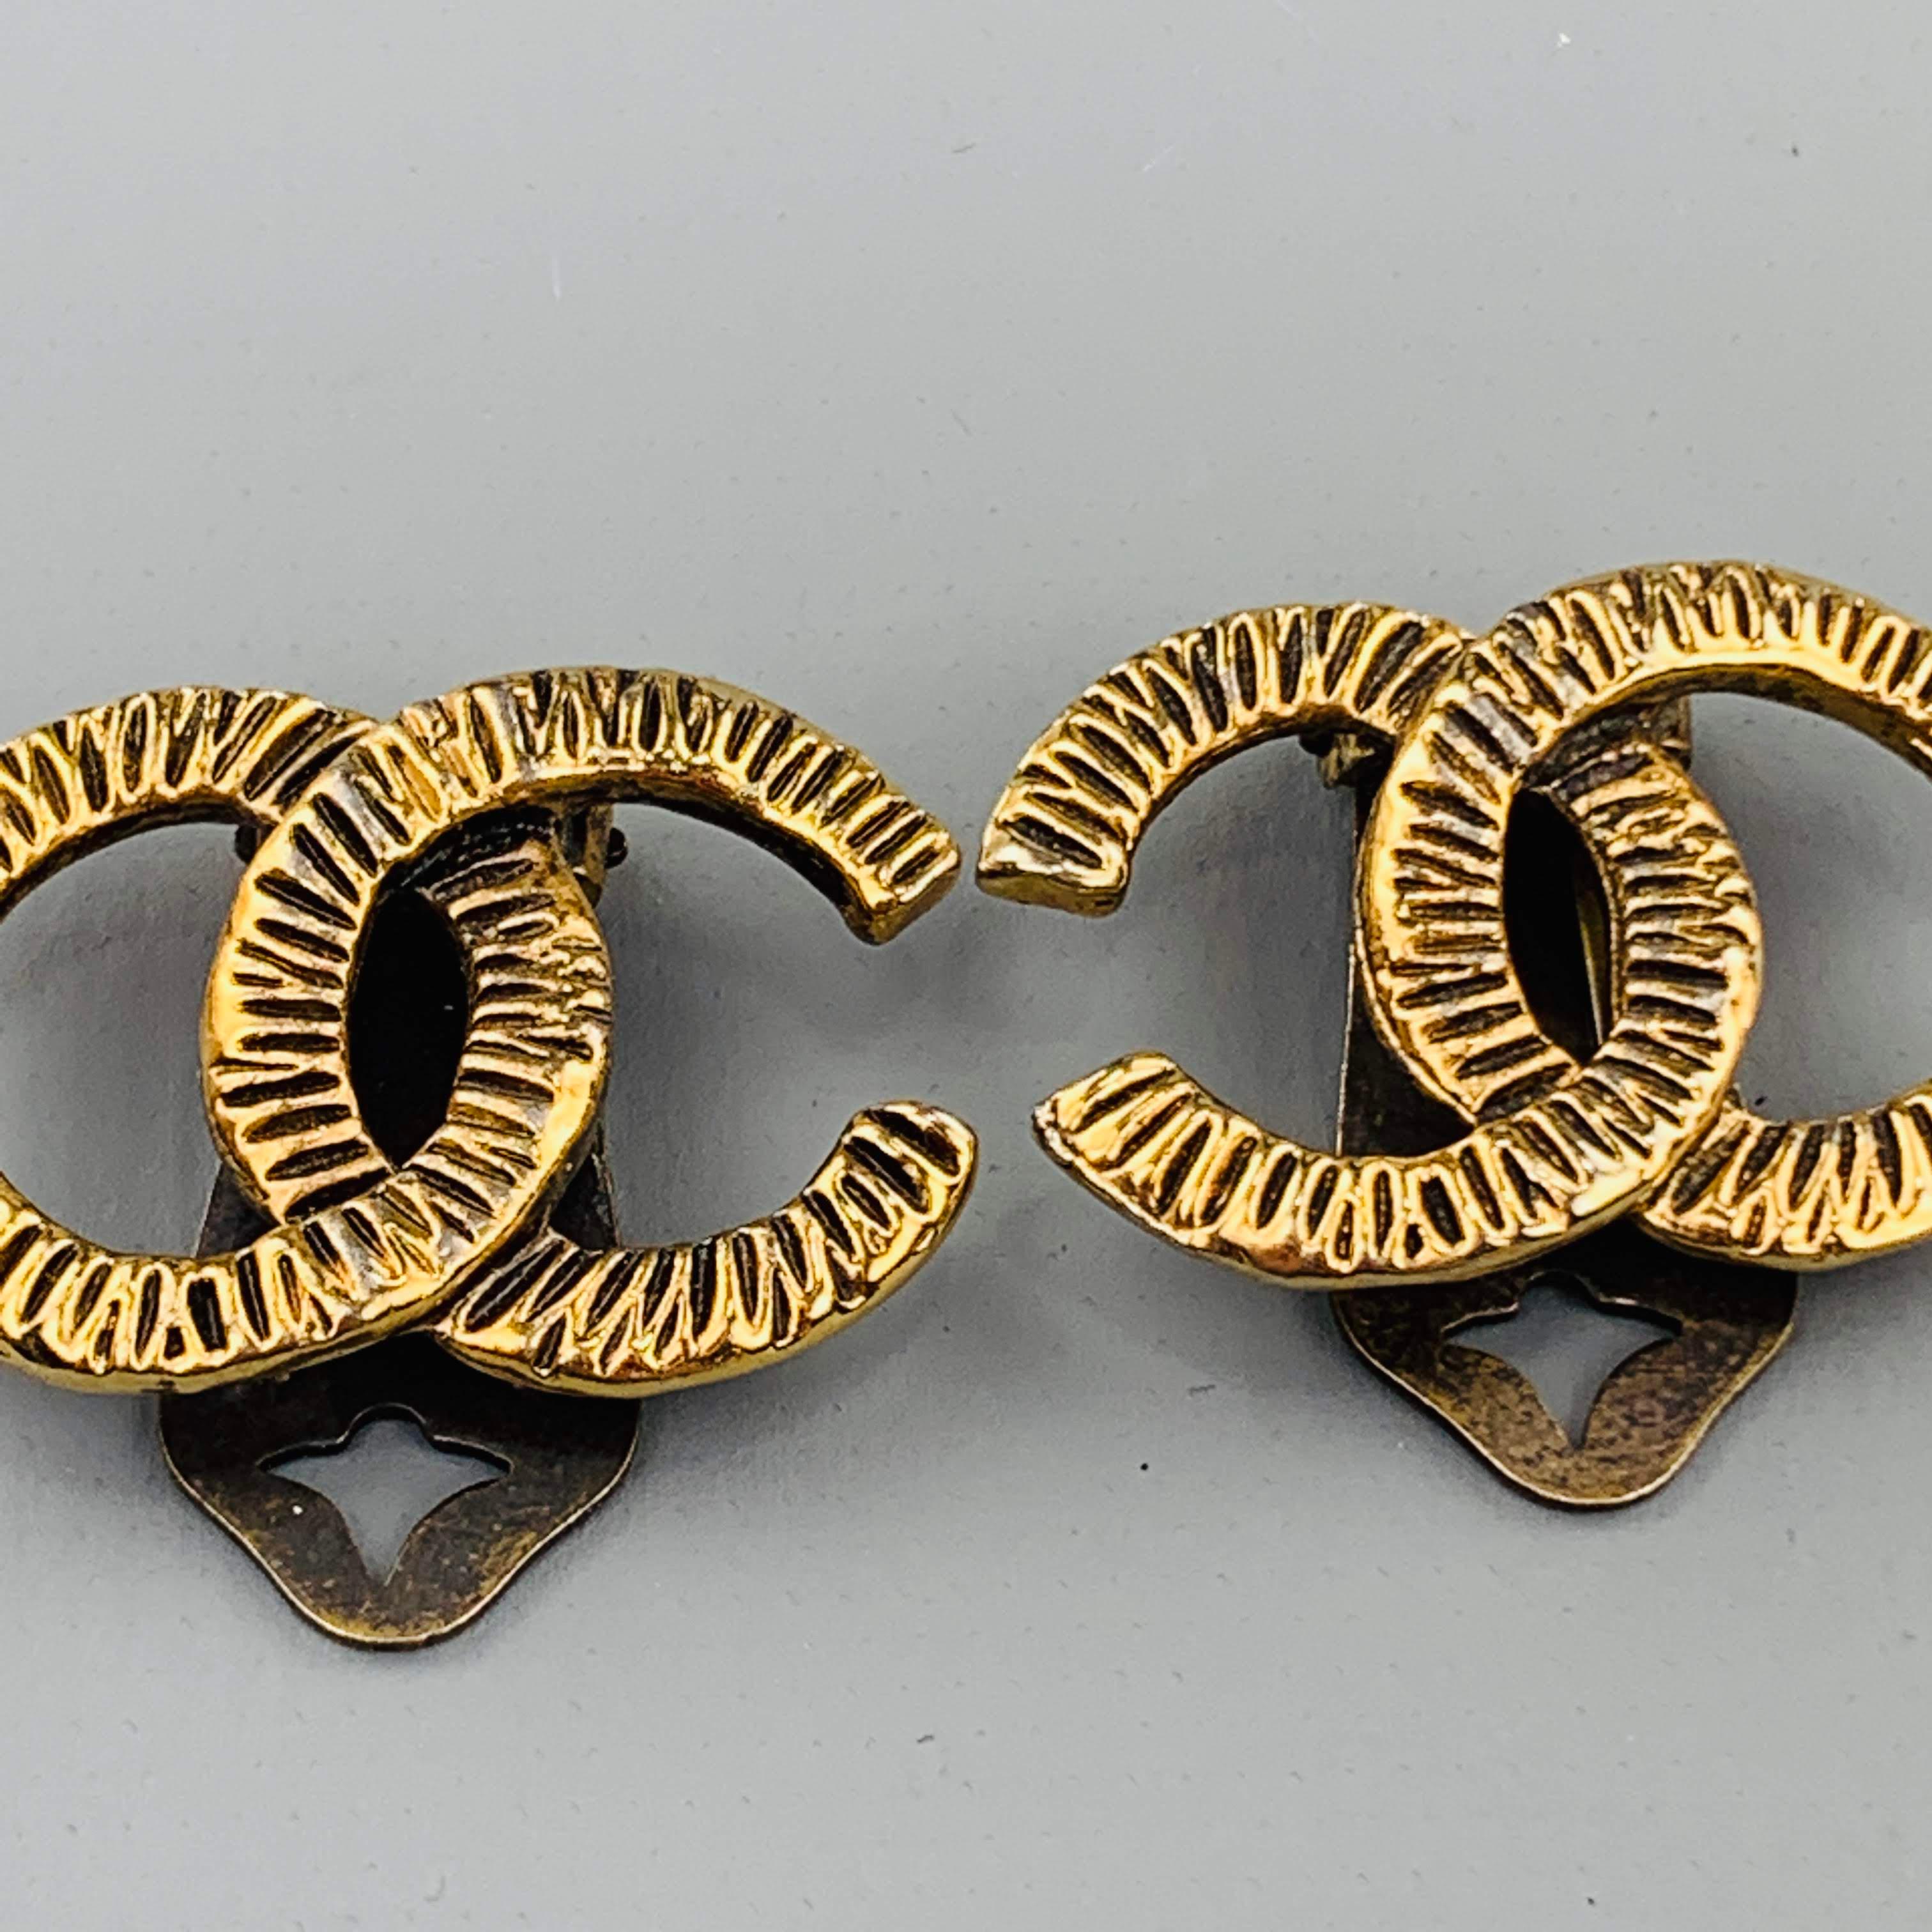 Rare vintage CHANEL clip on earrings circa 1950's come in antique gold tone metal with a classic textured CC cutout logo. Wear with age. As-is.
 
Good Pre-Owned Condition.
Marked: (no markings. Circa 1950's)
 
3 x 2 cm.